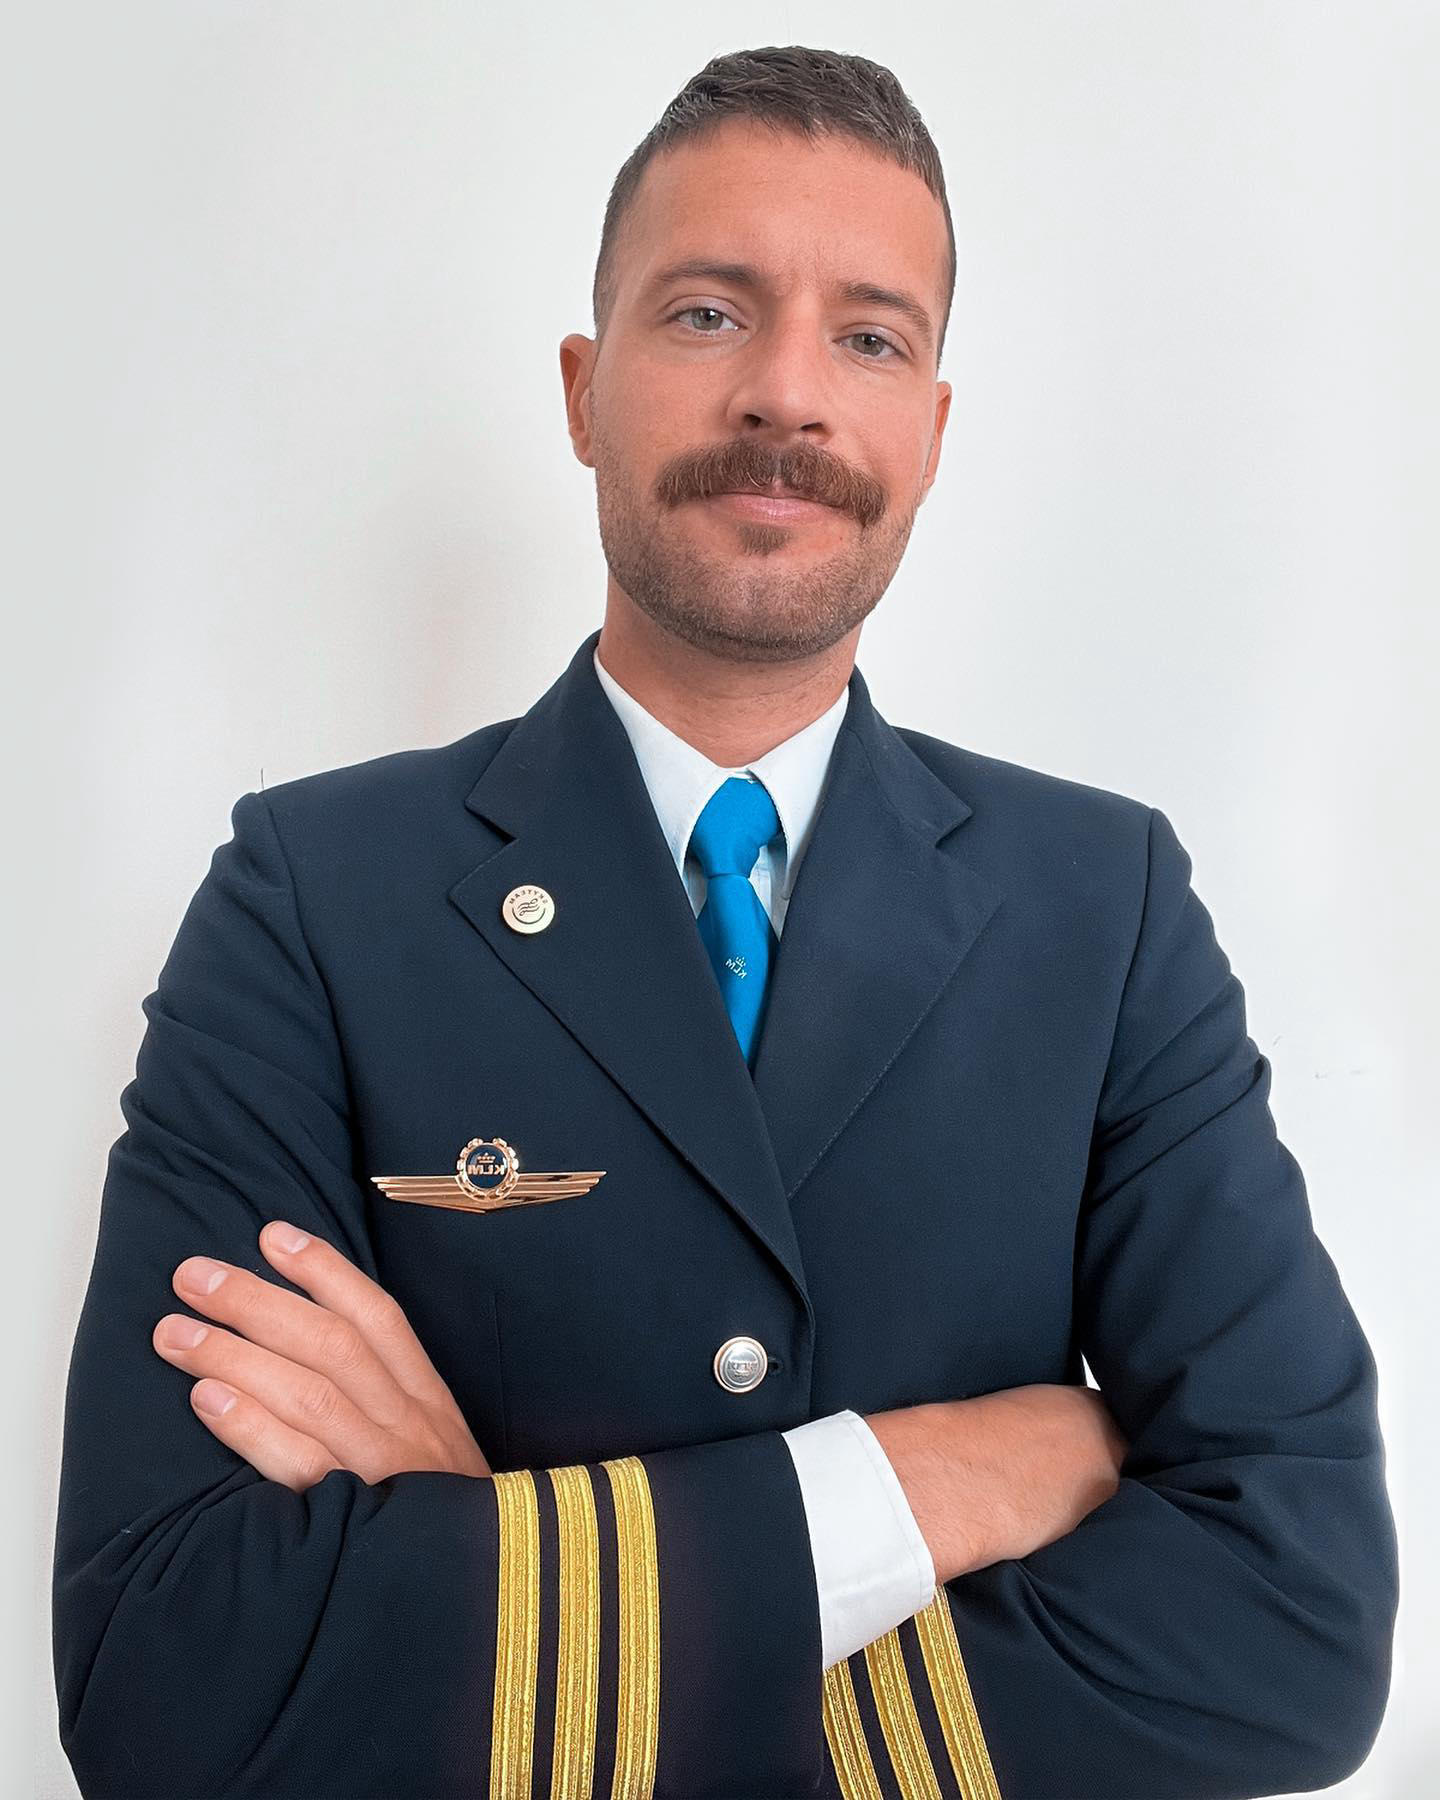 image  1 KLM Royal Dutch Airlines - Happy last day of Movember